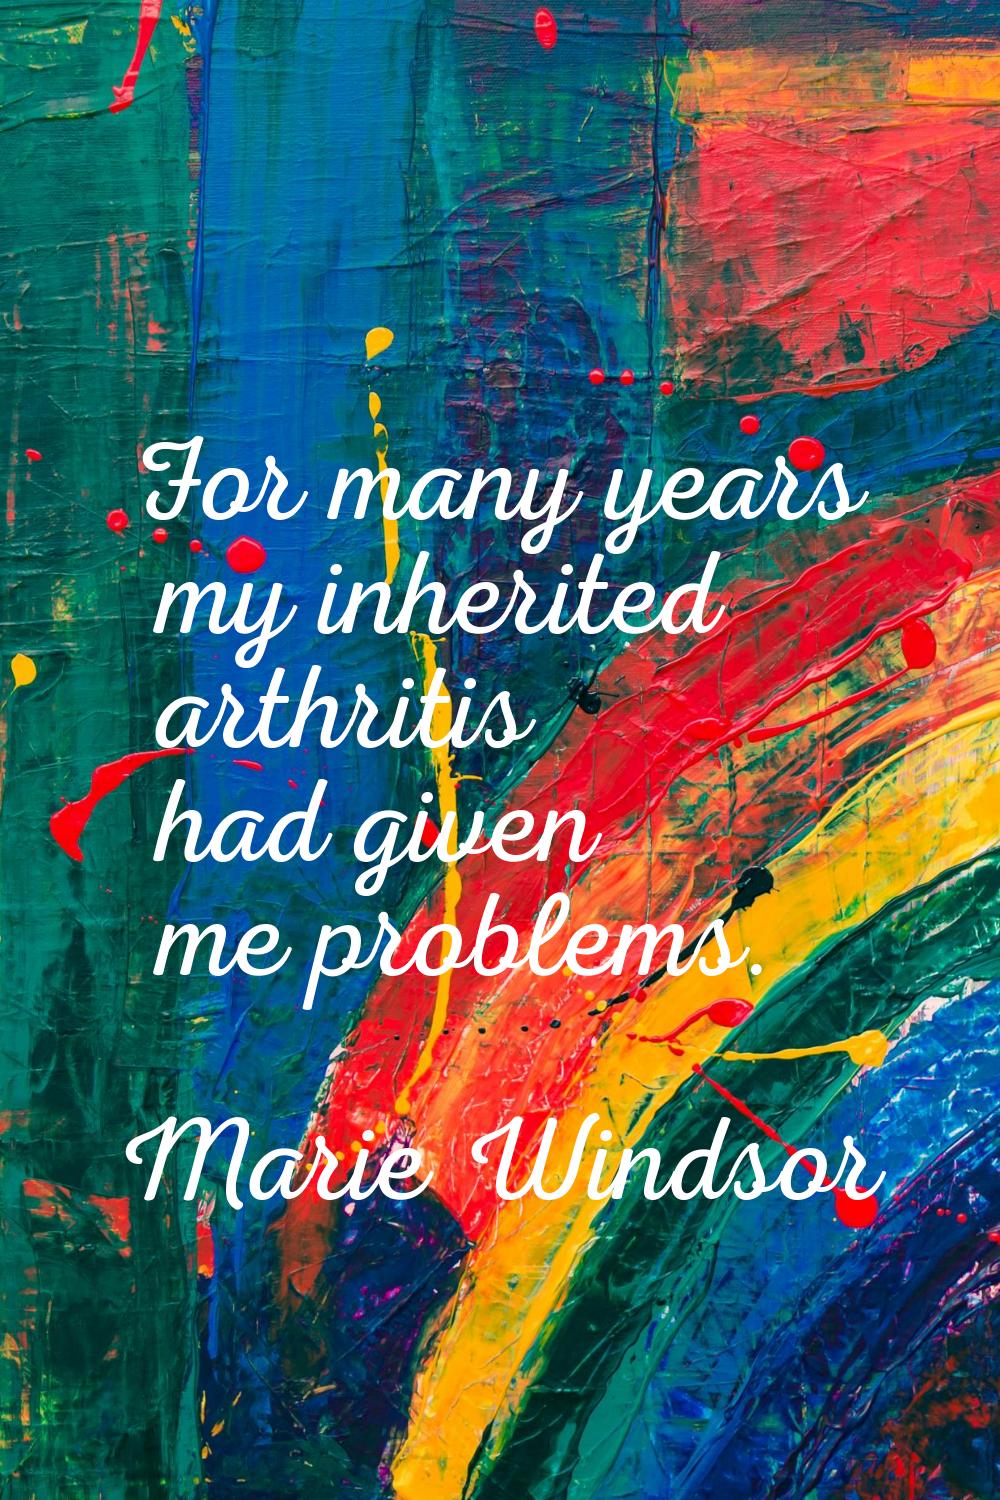 For many years my inherited arthritis had given me problems.